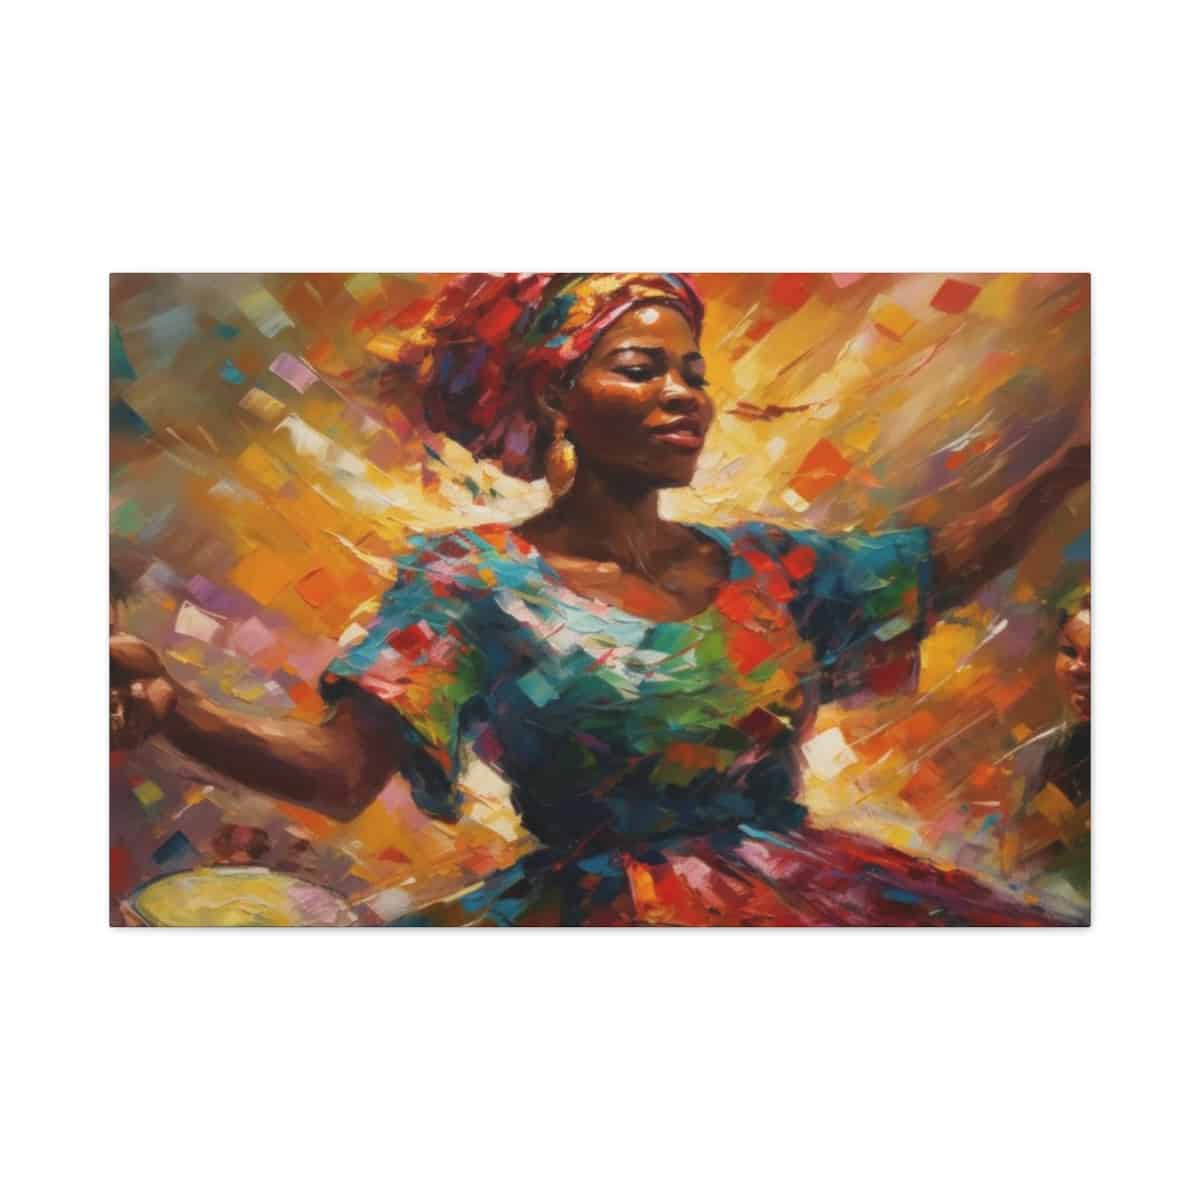 Togolese Woman Dancing To Music